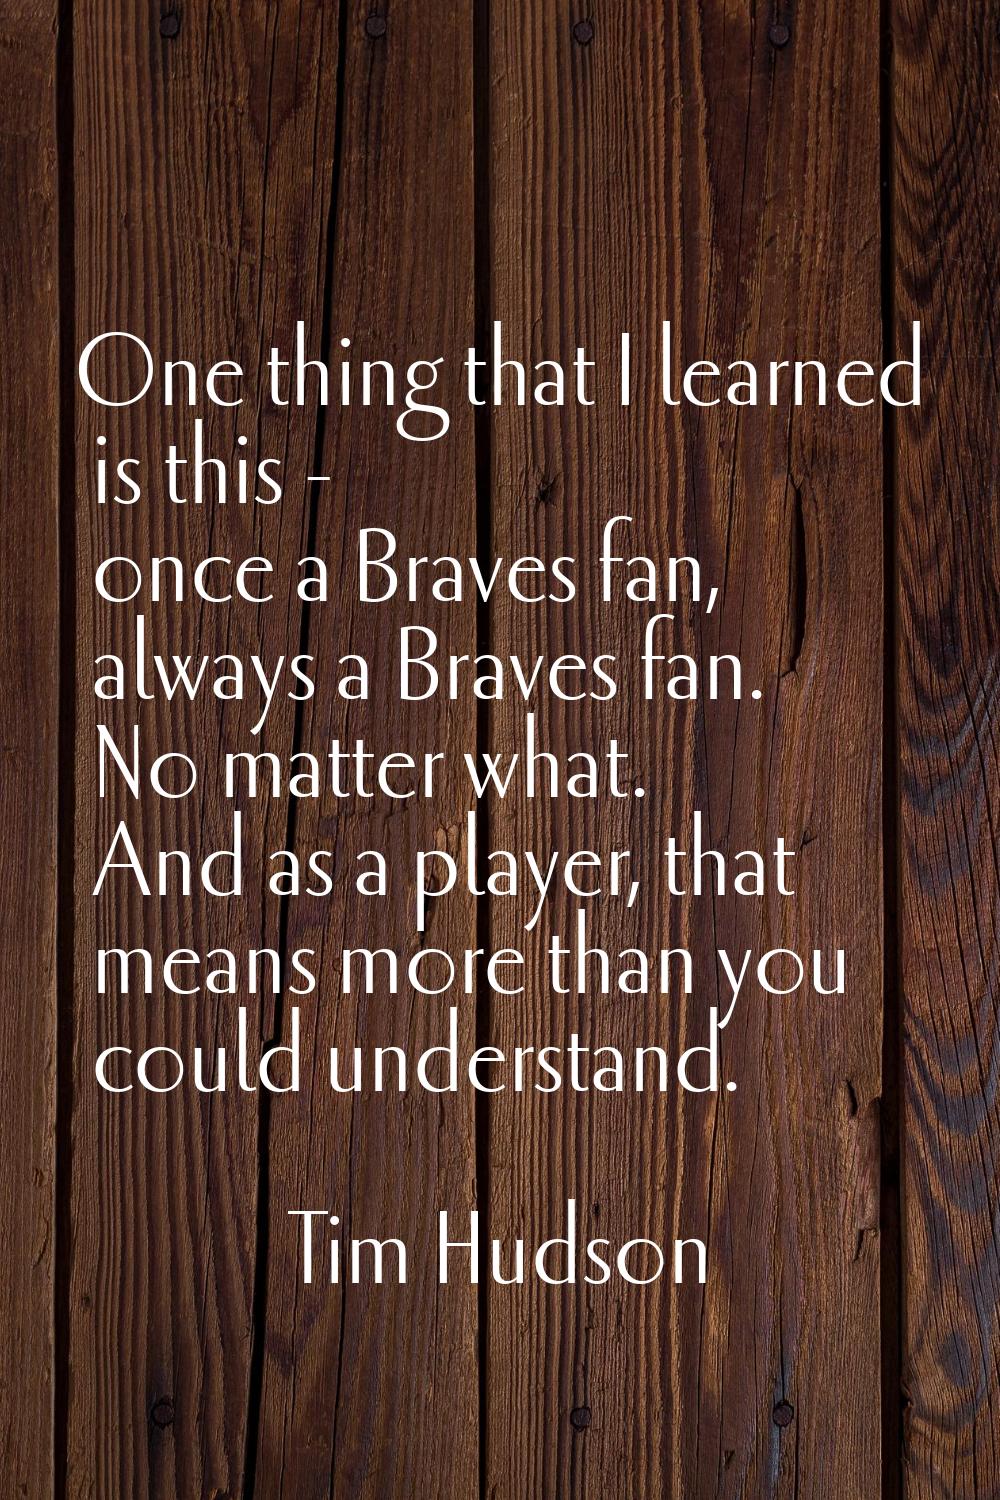 One thing that I learned is this - once a Braves fan, always a Braves fan. No matter what. And as a